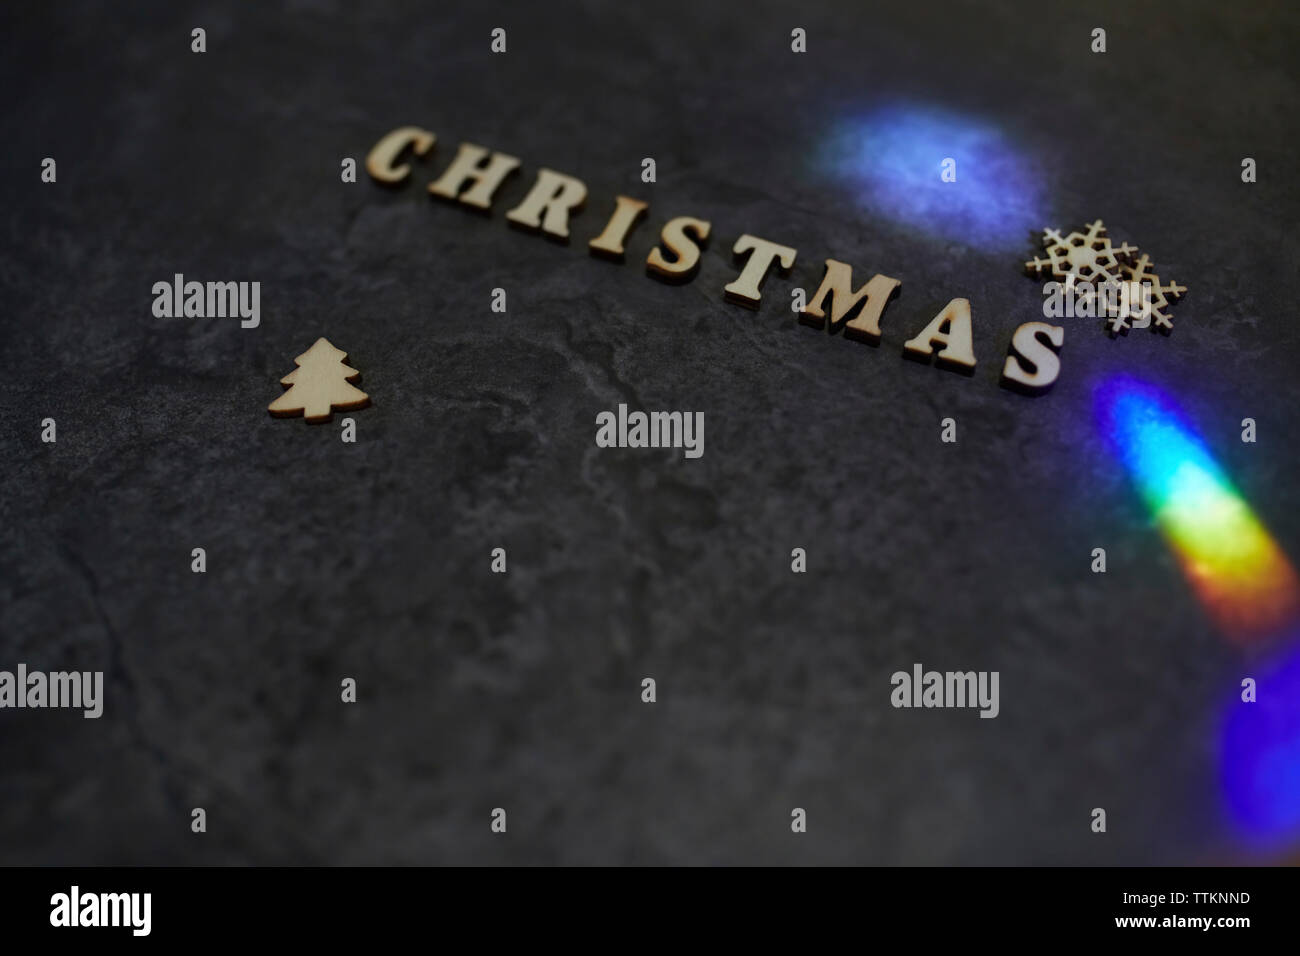 High angle view of Christmas text with decorations and light effect on table Stock Photo